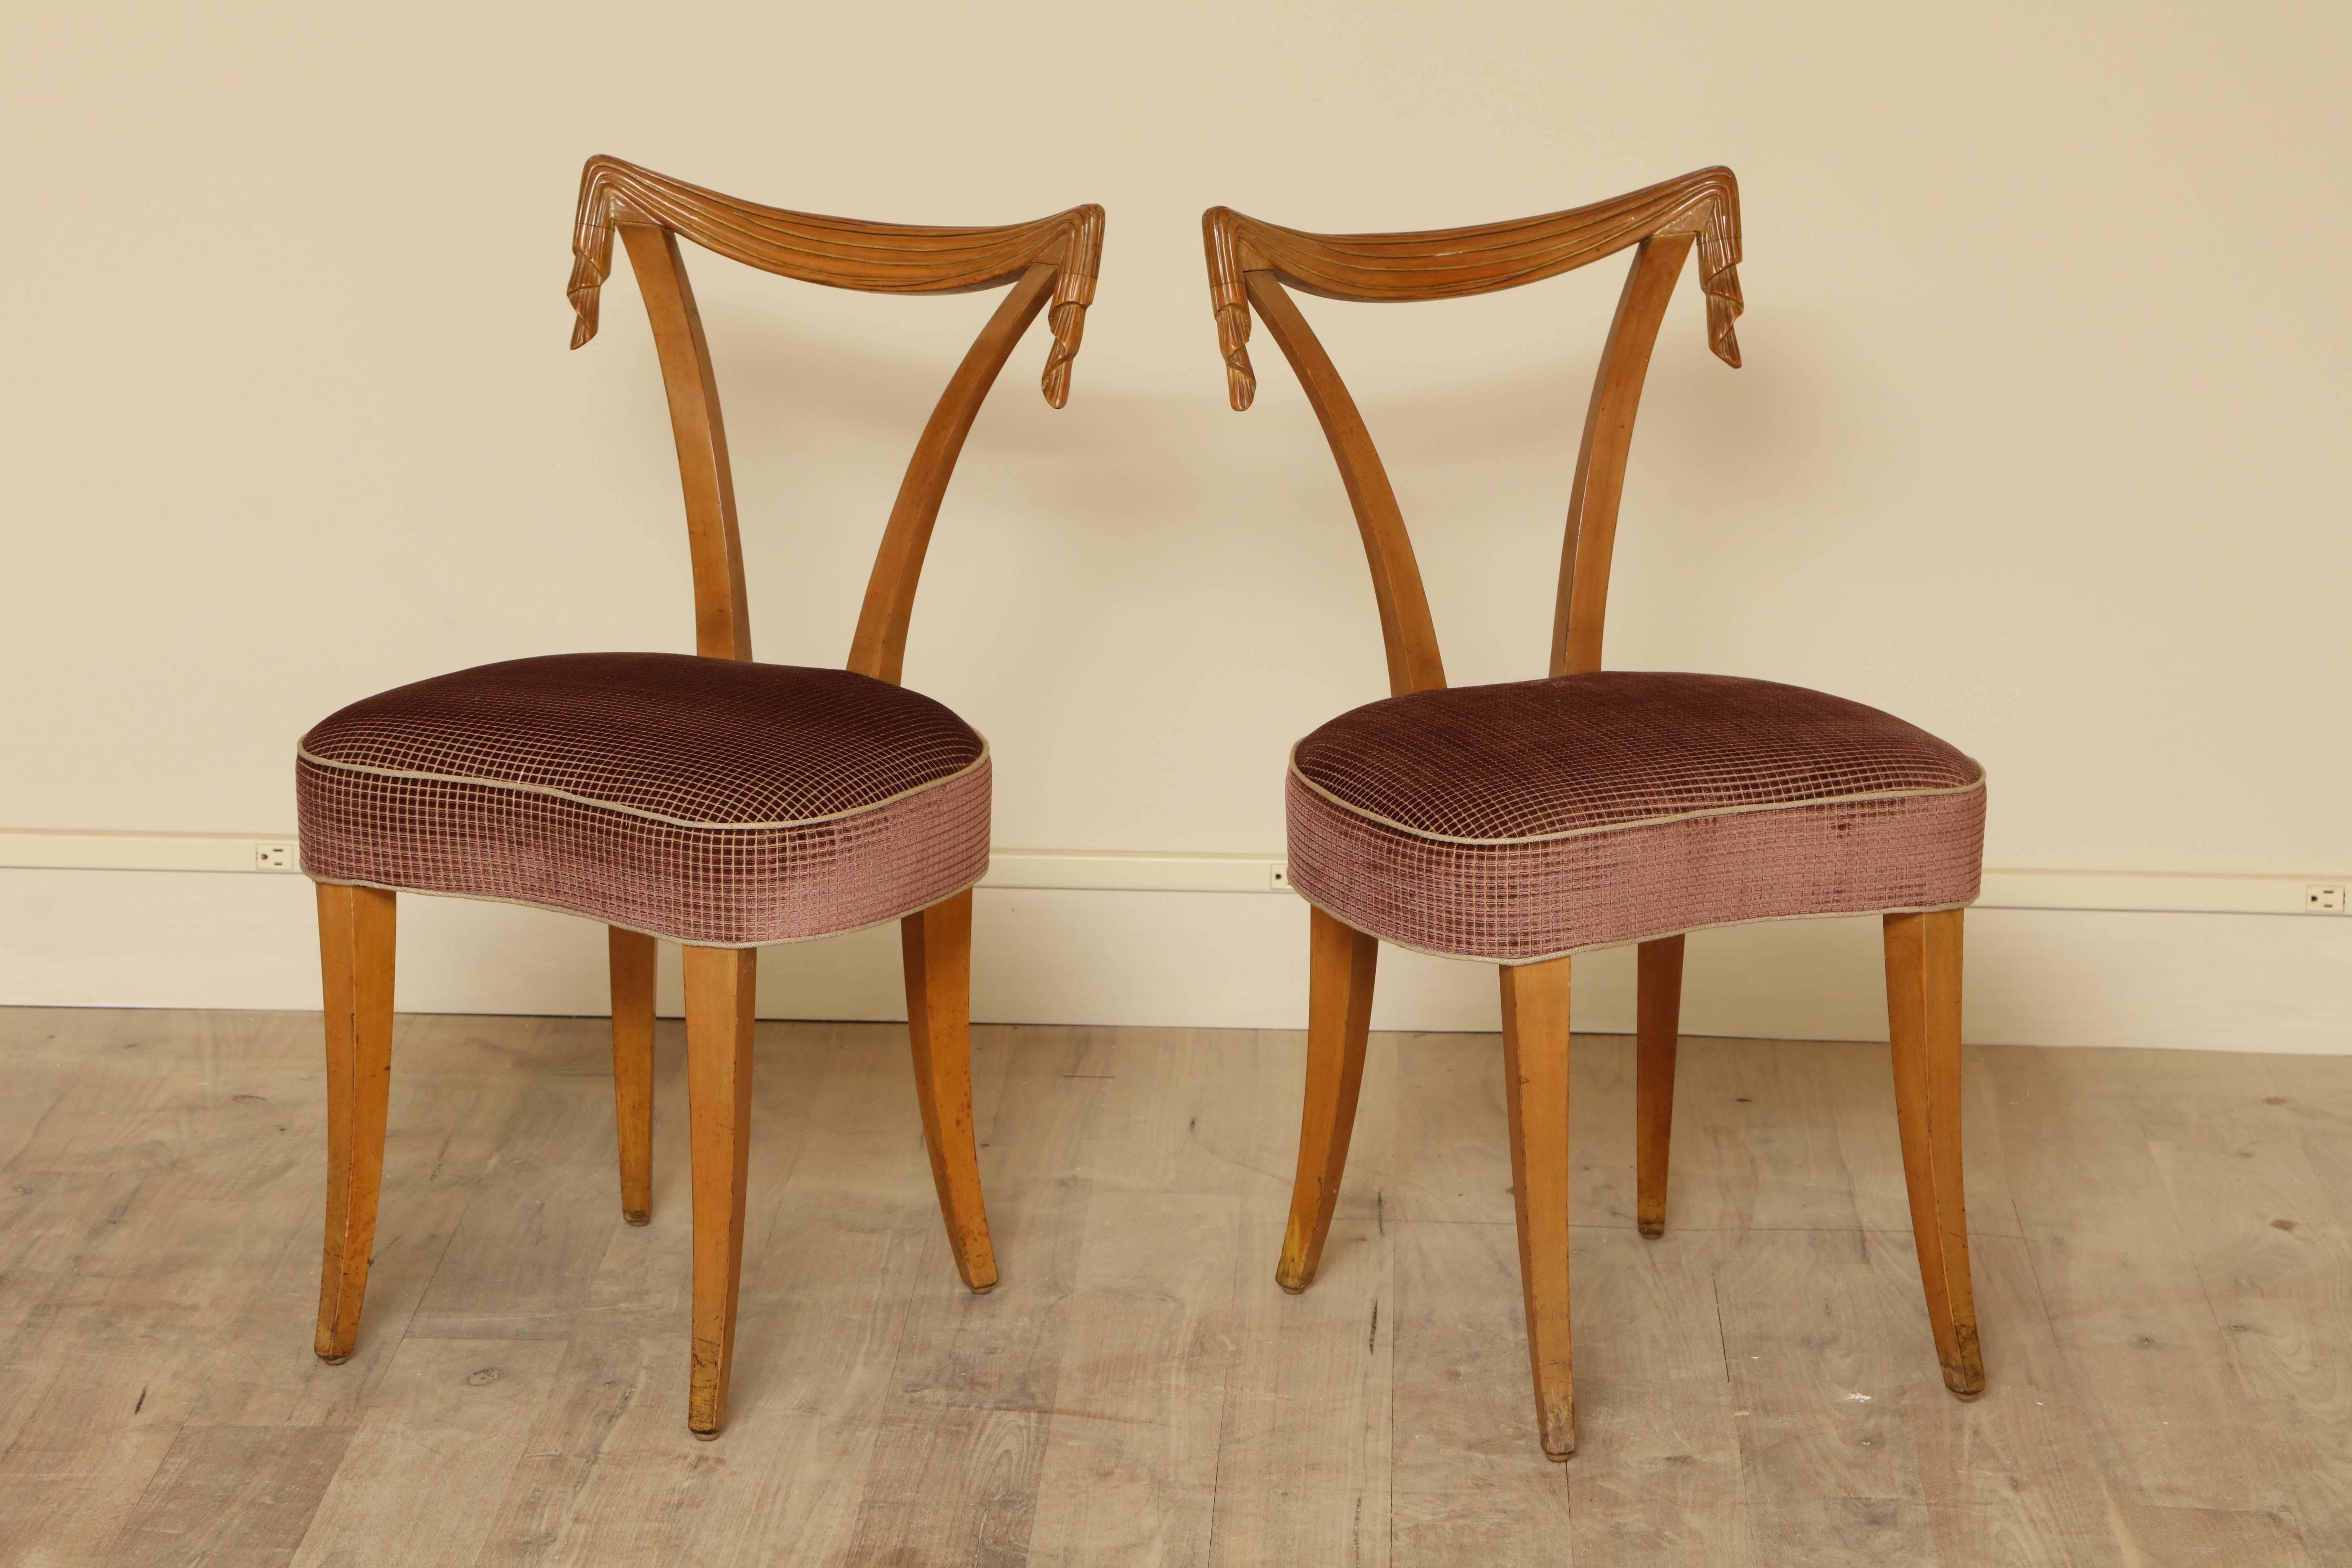 Pair of carved side chairs by Grosfeld House circa 1940 upholstered in merlot Roberto velvet by Thomas O'Brien with silk welt.